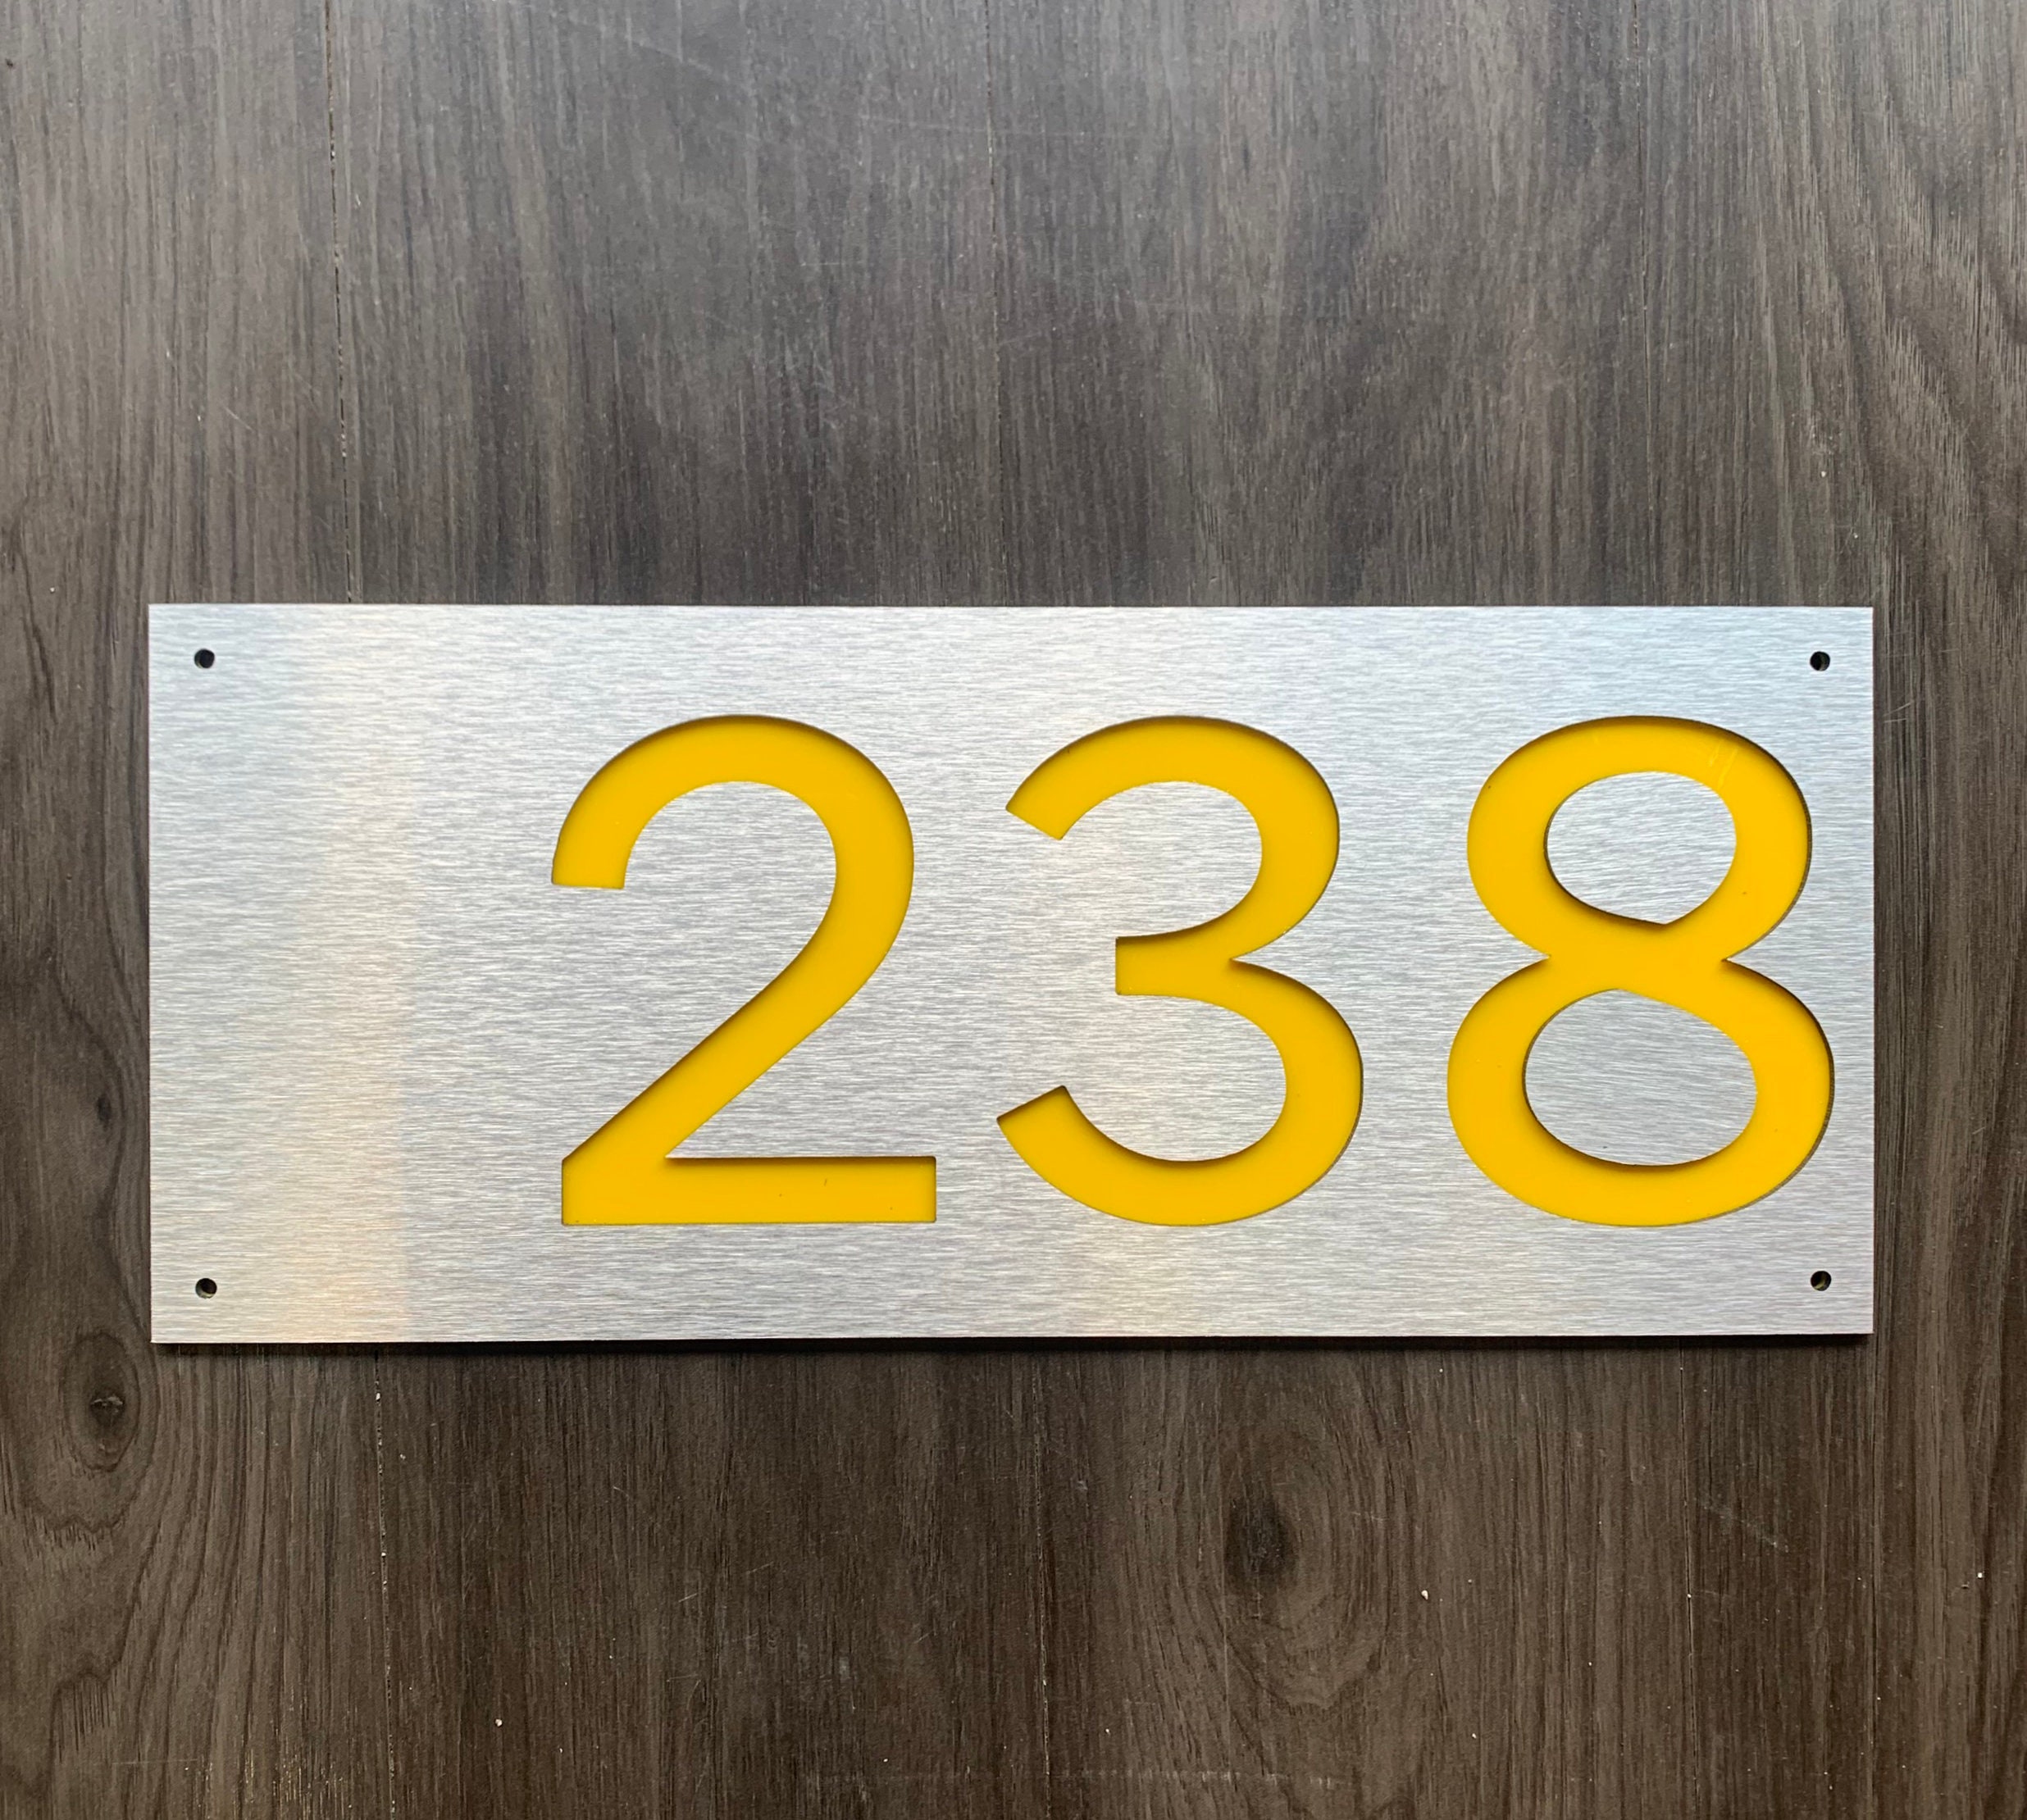 10 Inch Modern House Numbers Address Numbers Architectural 